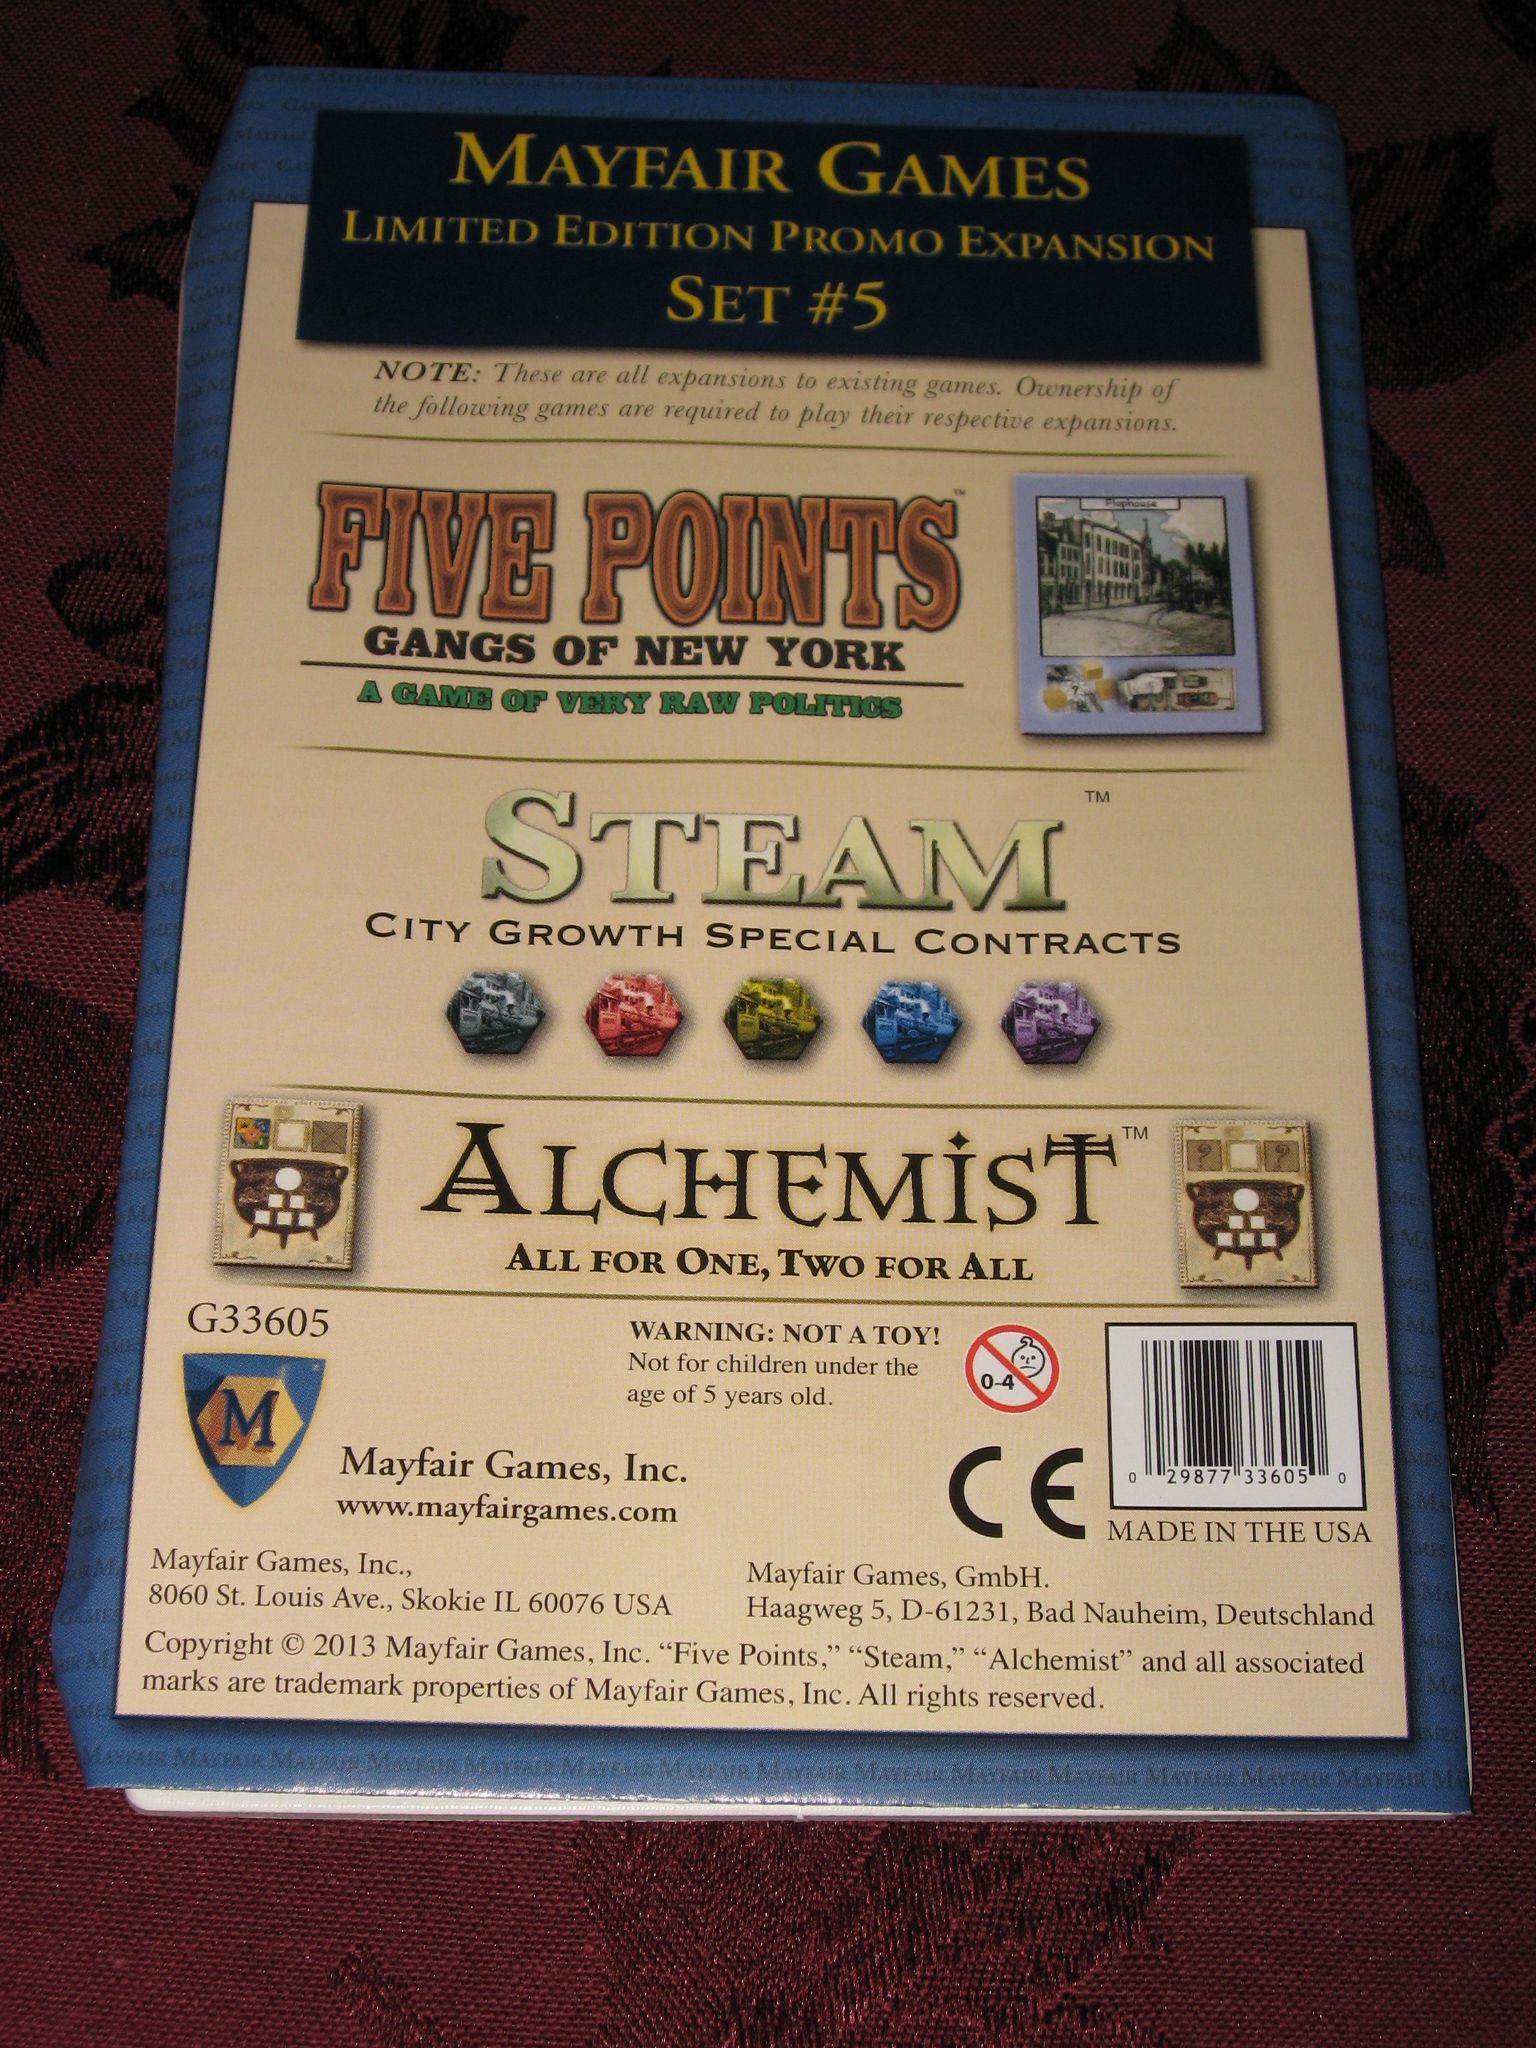 Mayfair Games Limited Edition Promo Expansion Set #5